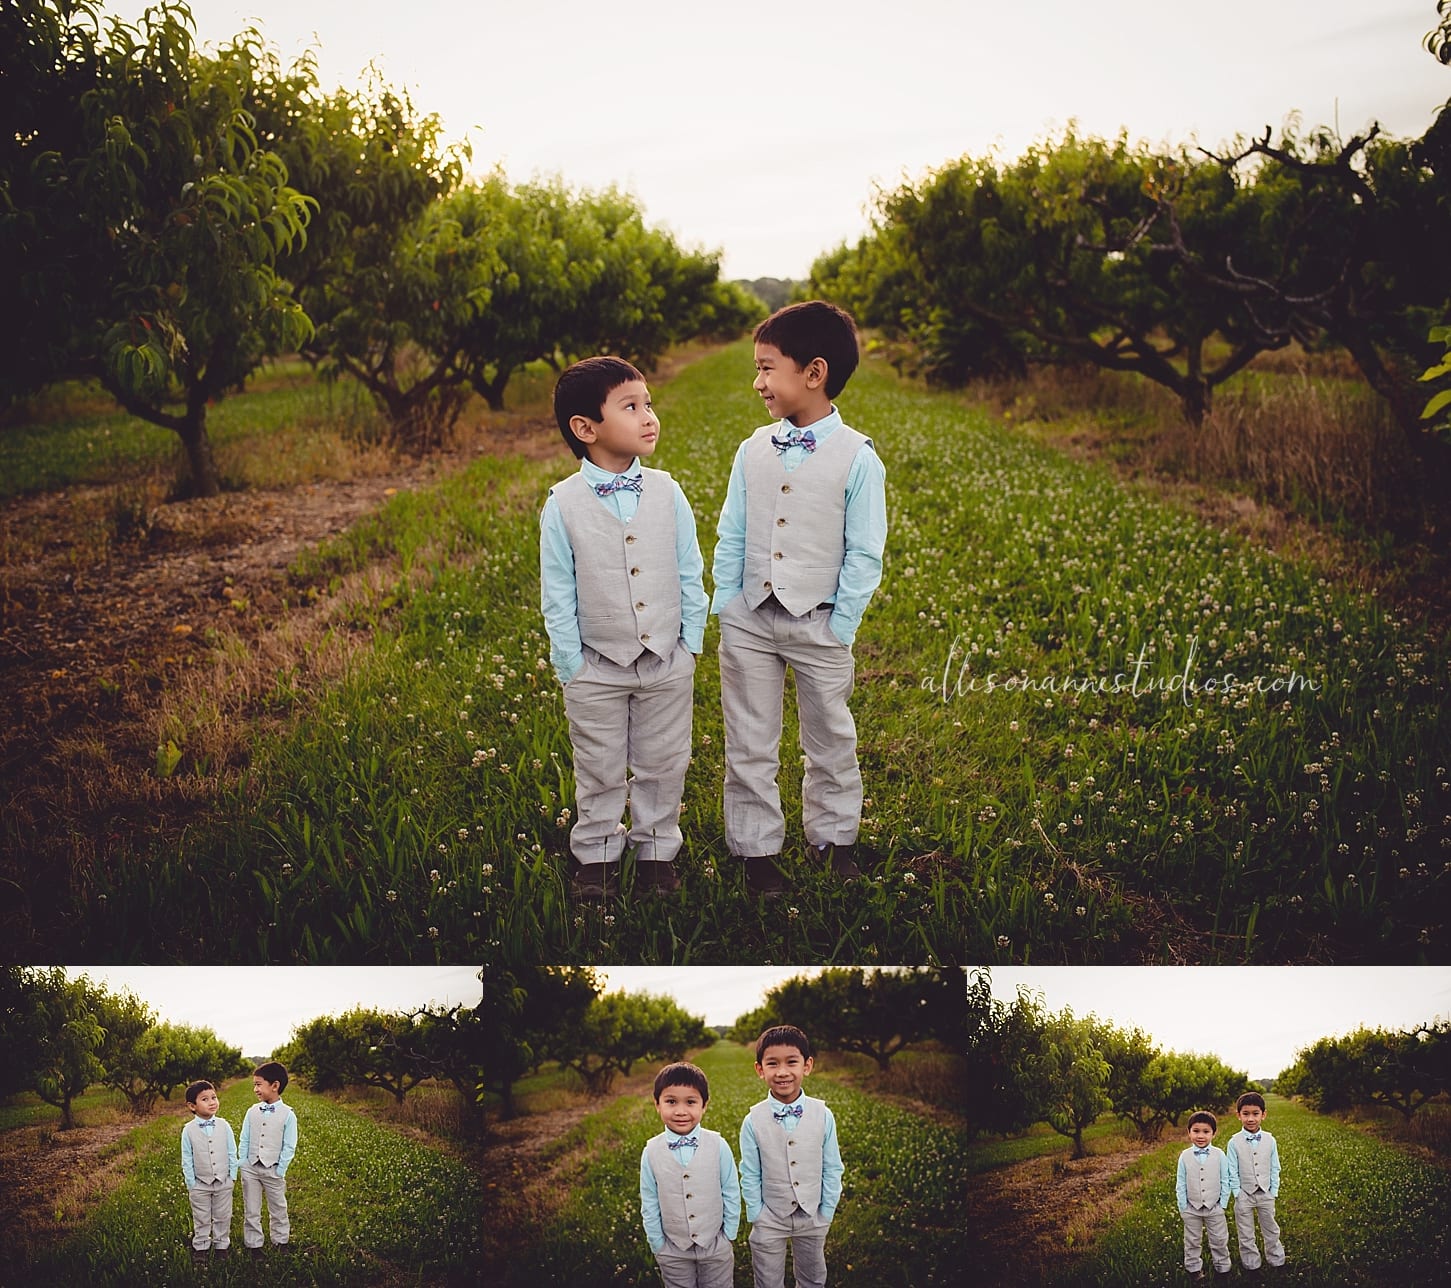 Allison Gallagher, Love, Hammonton, AllisonAnne Studios, Asian Family, best family photography in New Jersey, Janie & Jack, big brothers, peach orchards, Darla, best photographer in south jersey